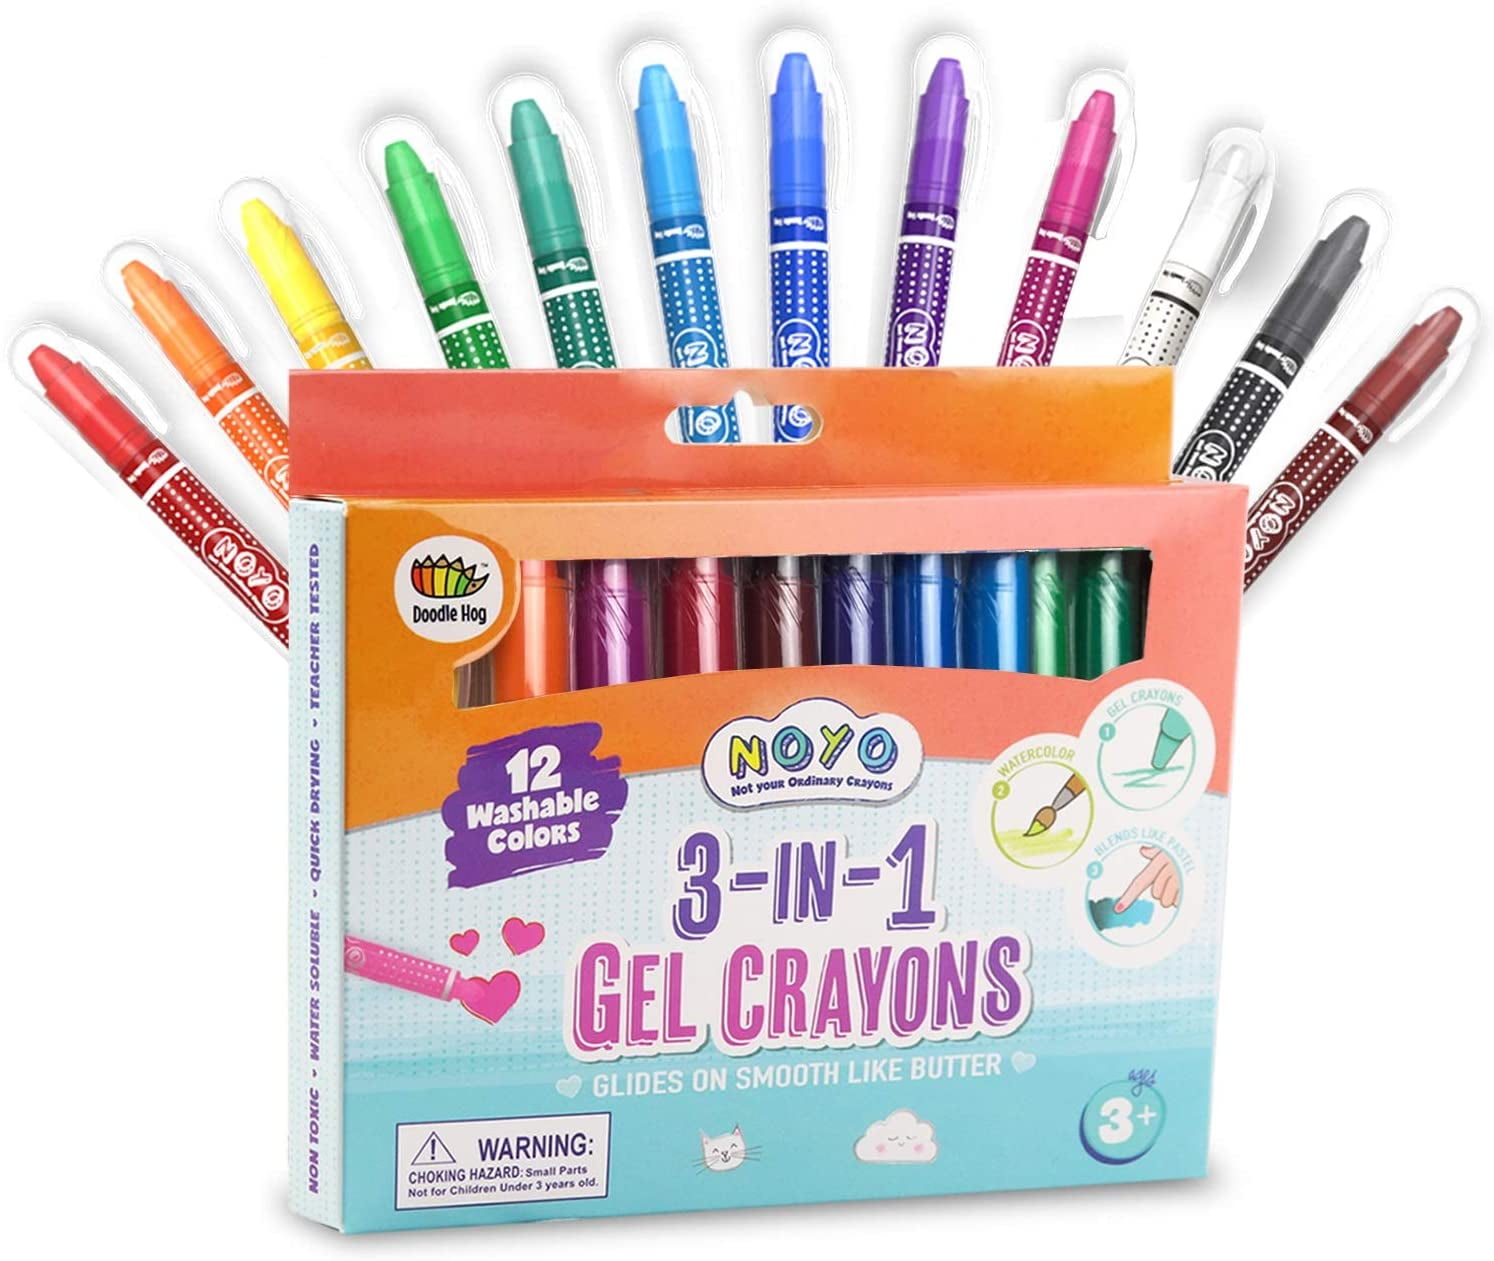  ZY-Wisdom 36Colour Drop Crayons For Toddlers, Non